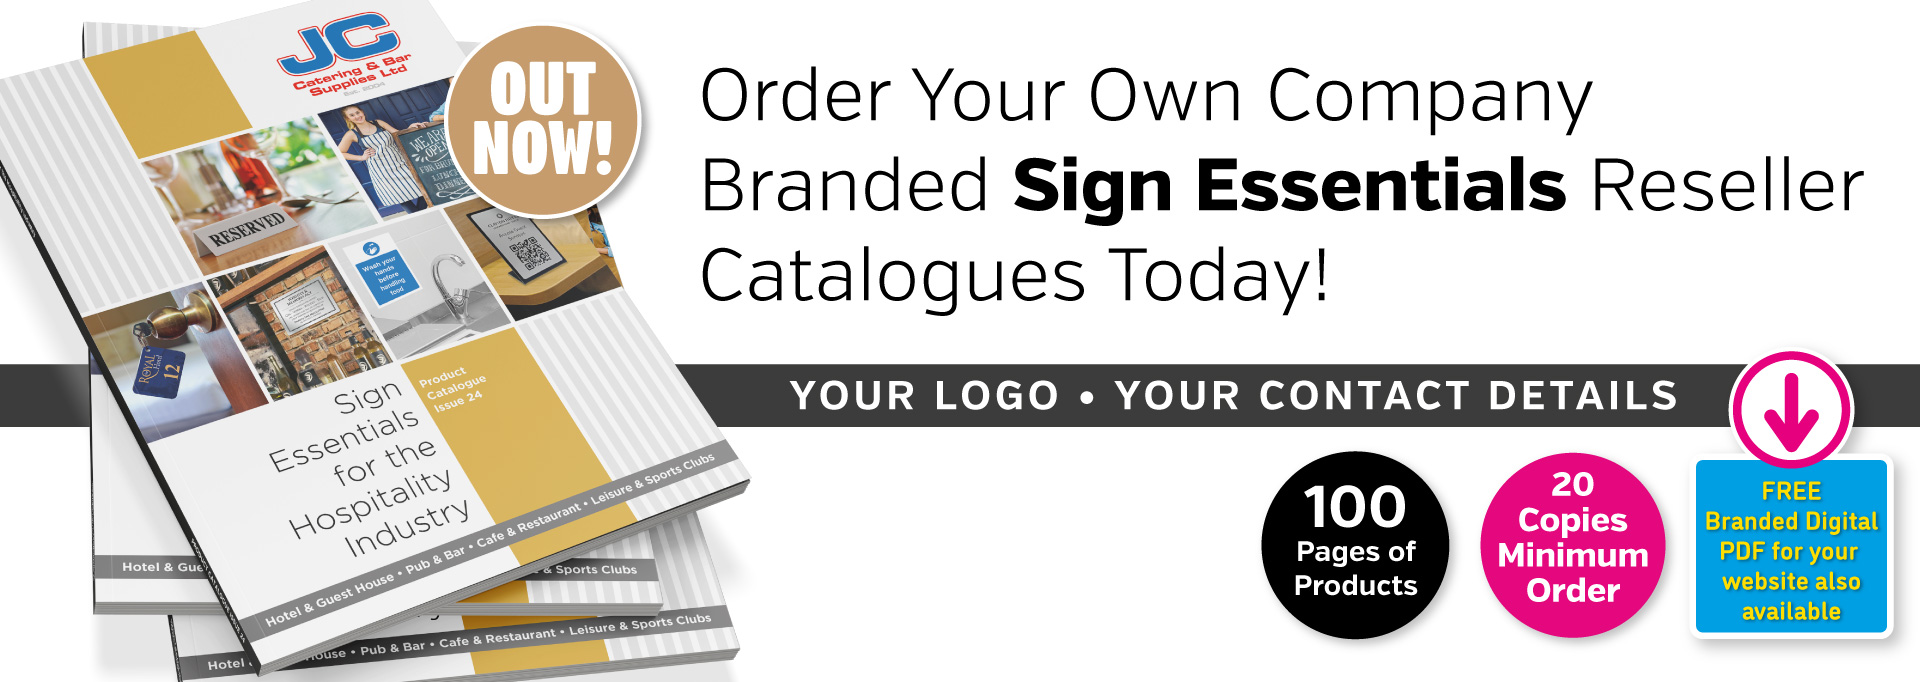 Order Your Own Company Branded Sign Essentials Reseller Catalogues Today!